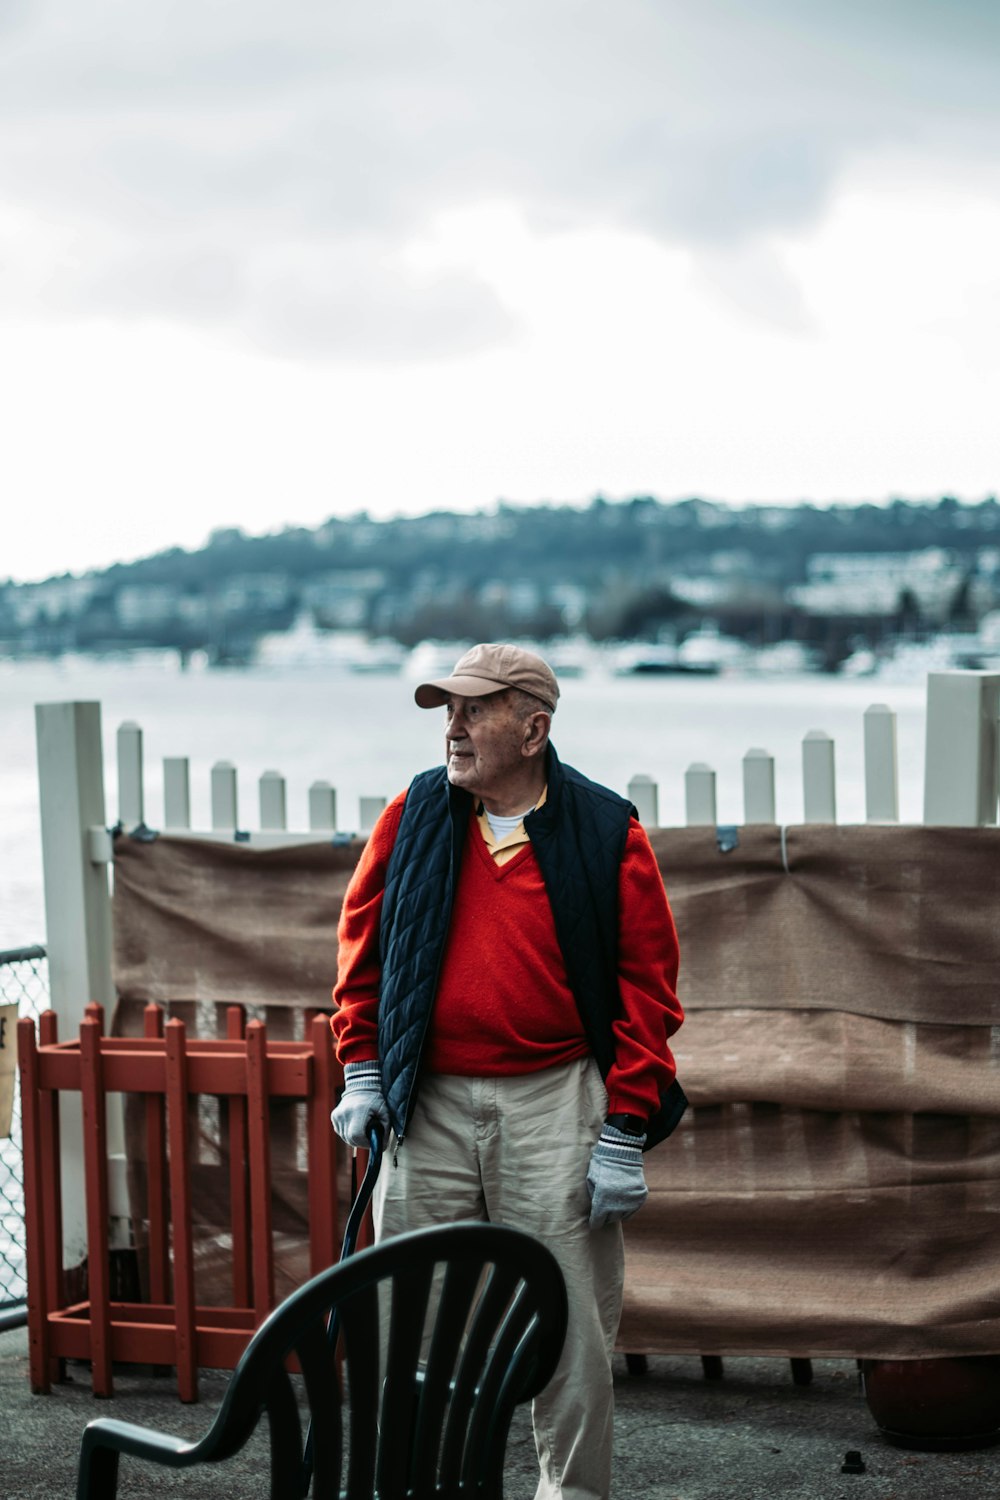 man in red jacket and gray pants standing on wooden dock during daytime